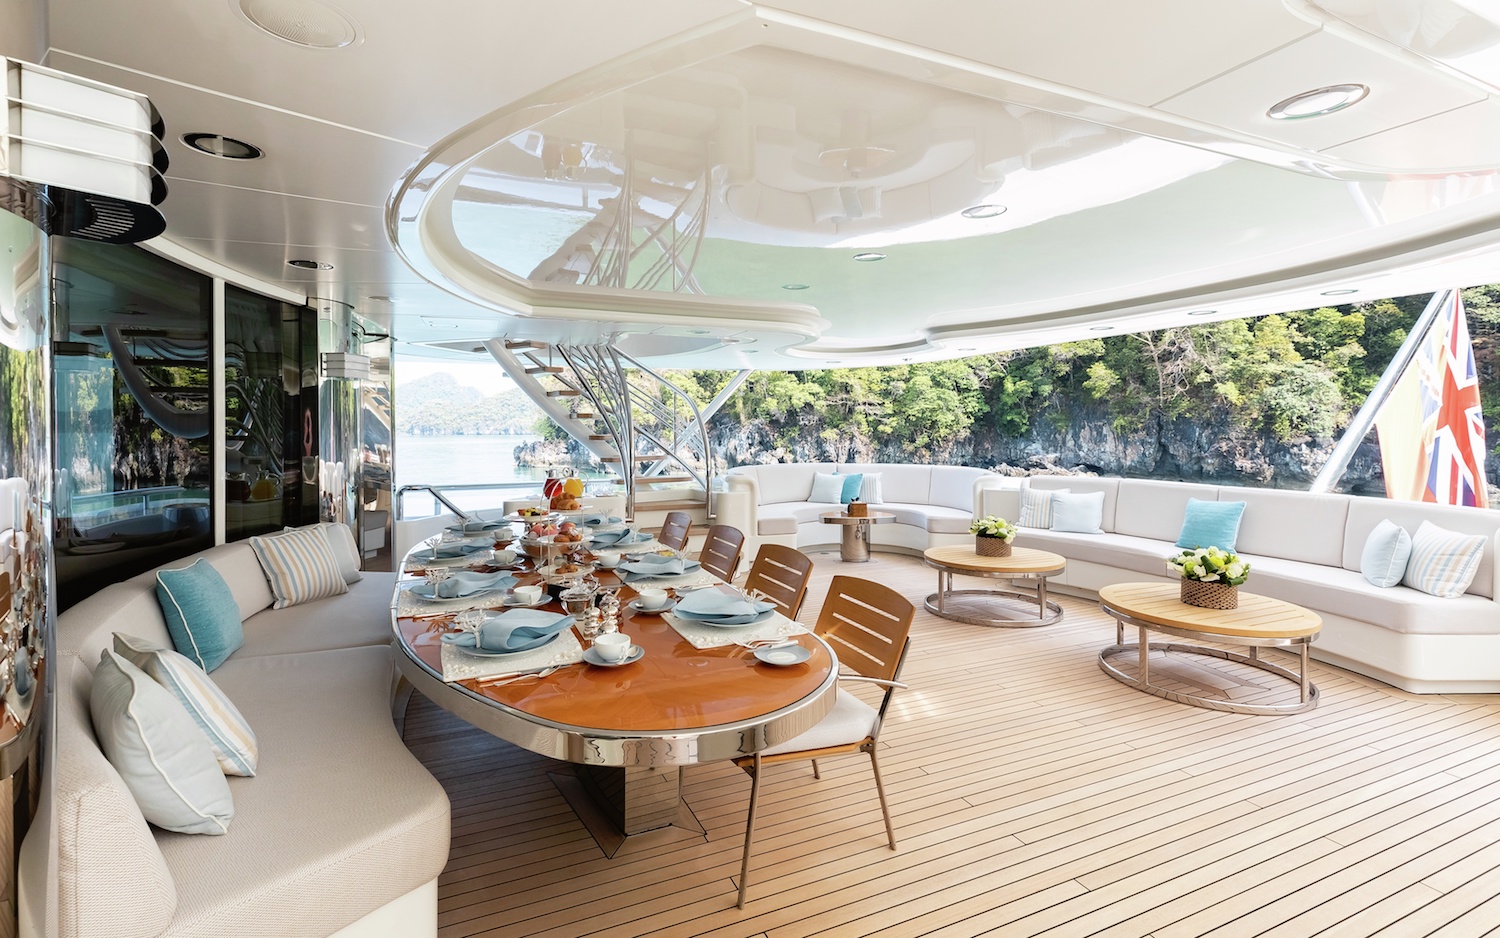 Alfresco Dining Area On The Aft Deck